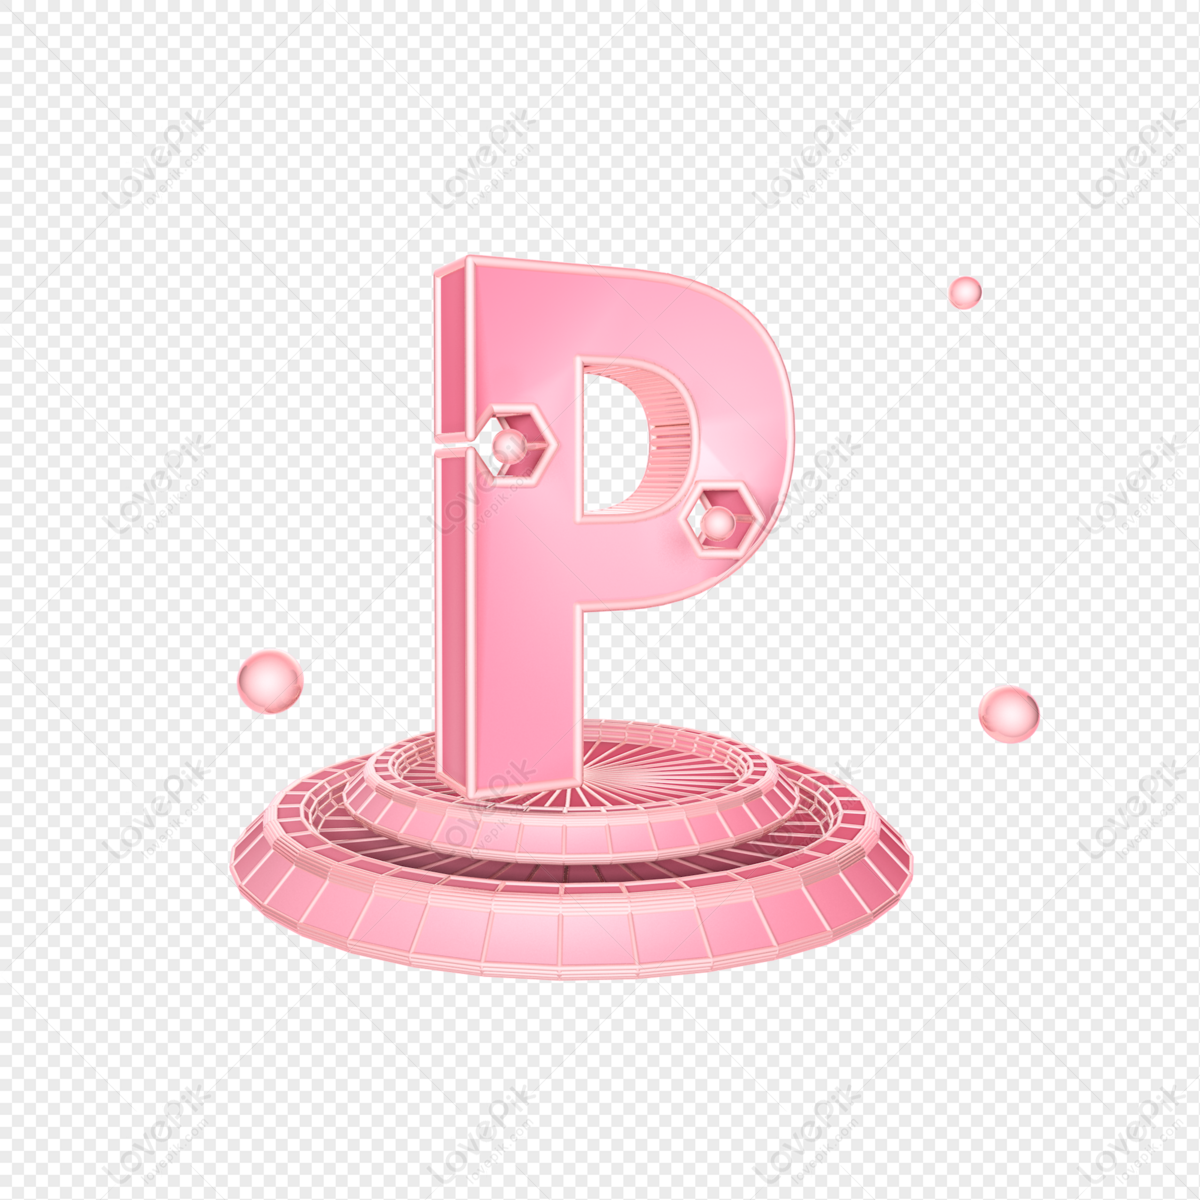 Pink Letter P Stereo Cutout Free Illustration PNG Image Free ...